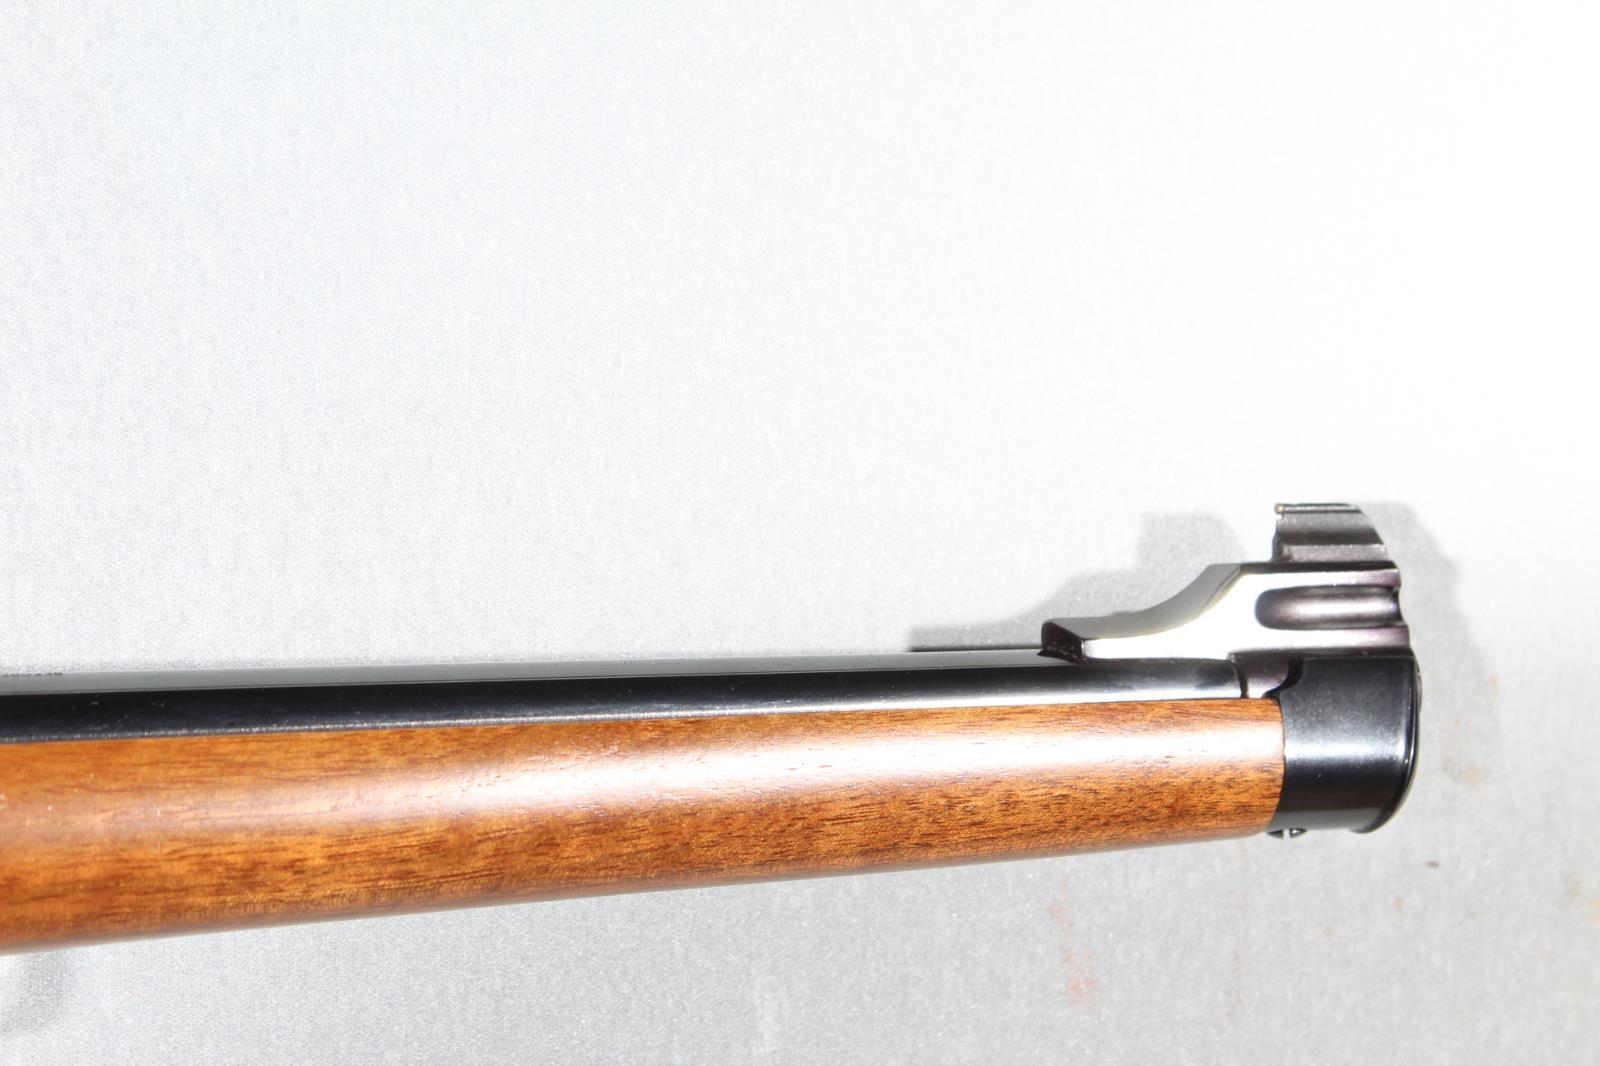 RUGER M77 MARK II RSI,, SN 783-61244